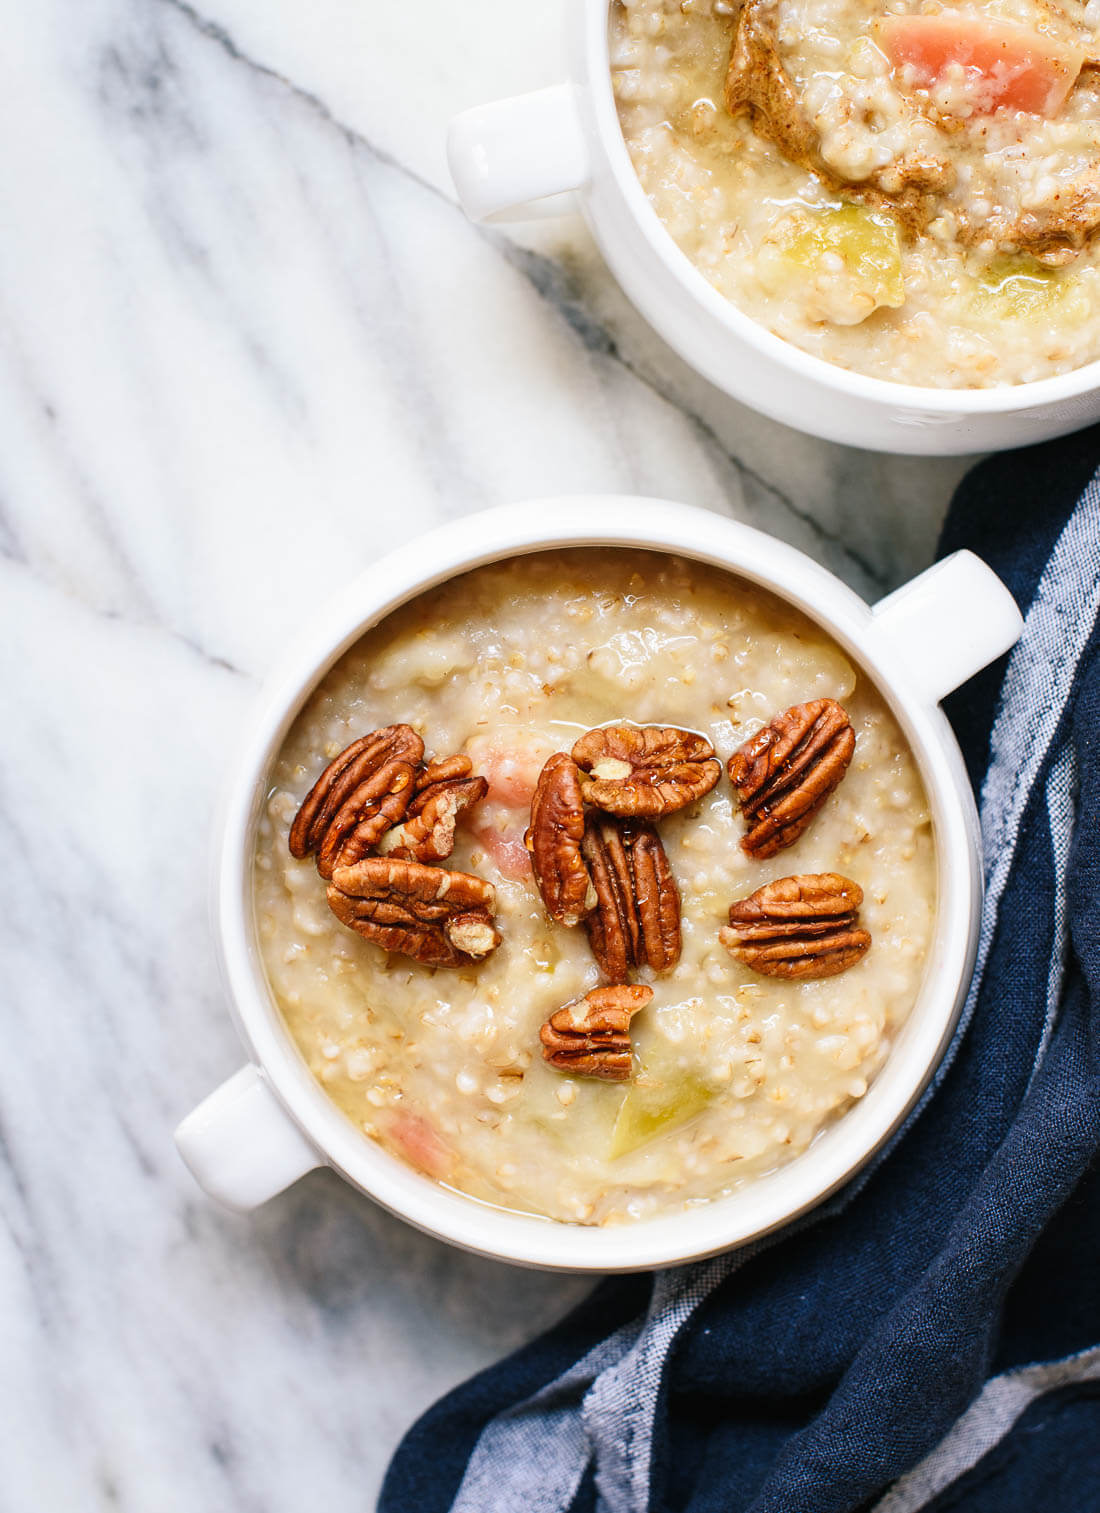 Meet my favorite fall breakfast! Apples and steel-cut oats cook together in the same pot until they are creamy, delicious perfection. It's a hearty and delicious fall breakfast that reheats well for busy weekday mornings! cookieandkate.com